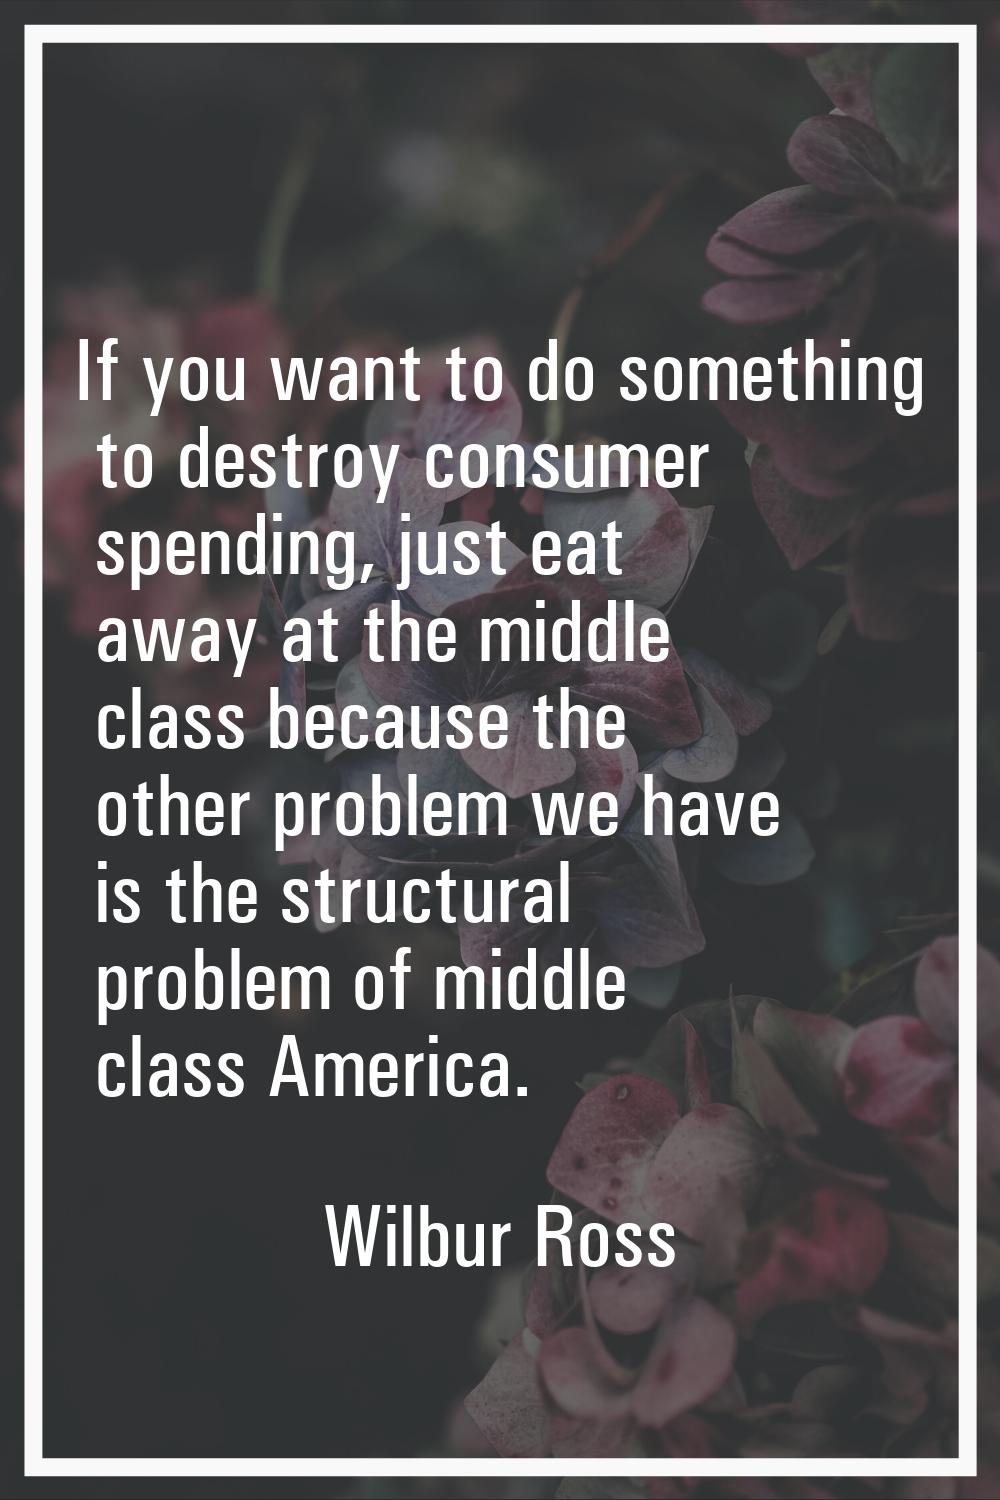 If you want to do something to destroy consumer spending, just eat away at the middle class because